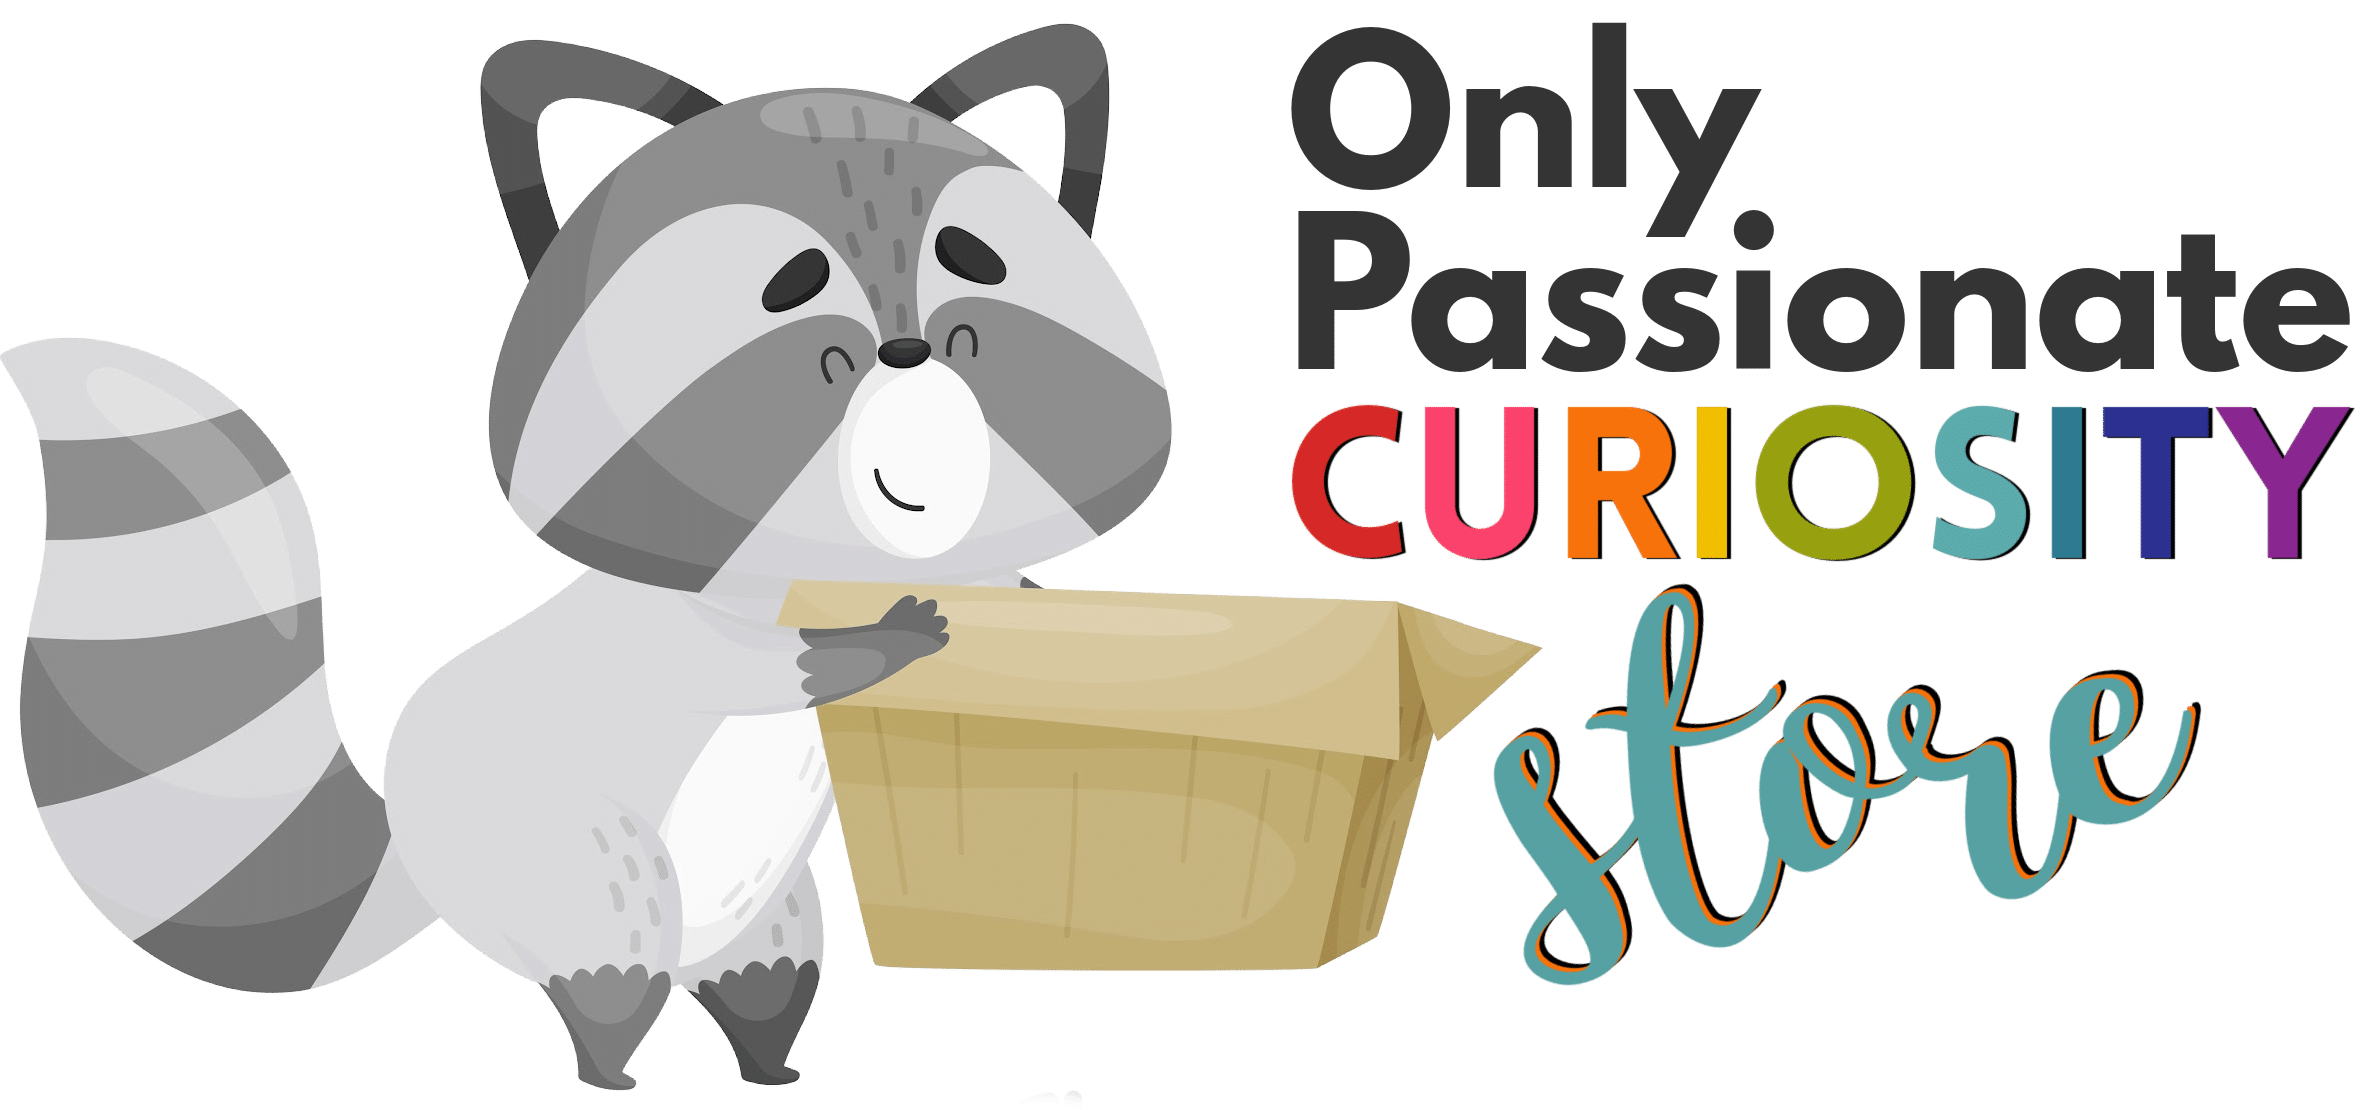 Only Passionate Curiosity